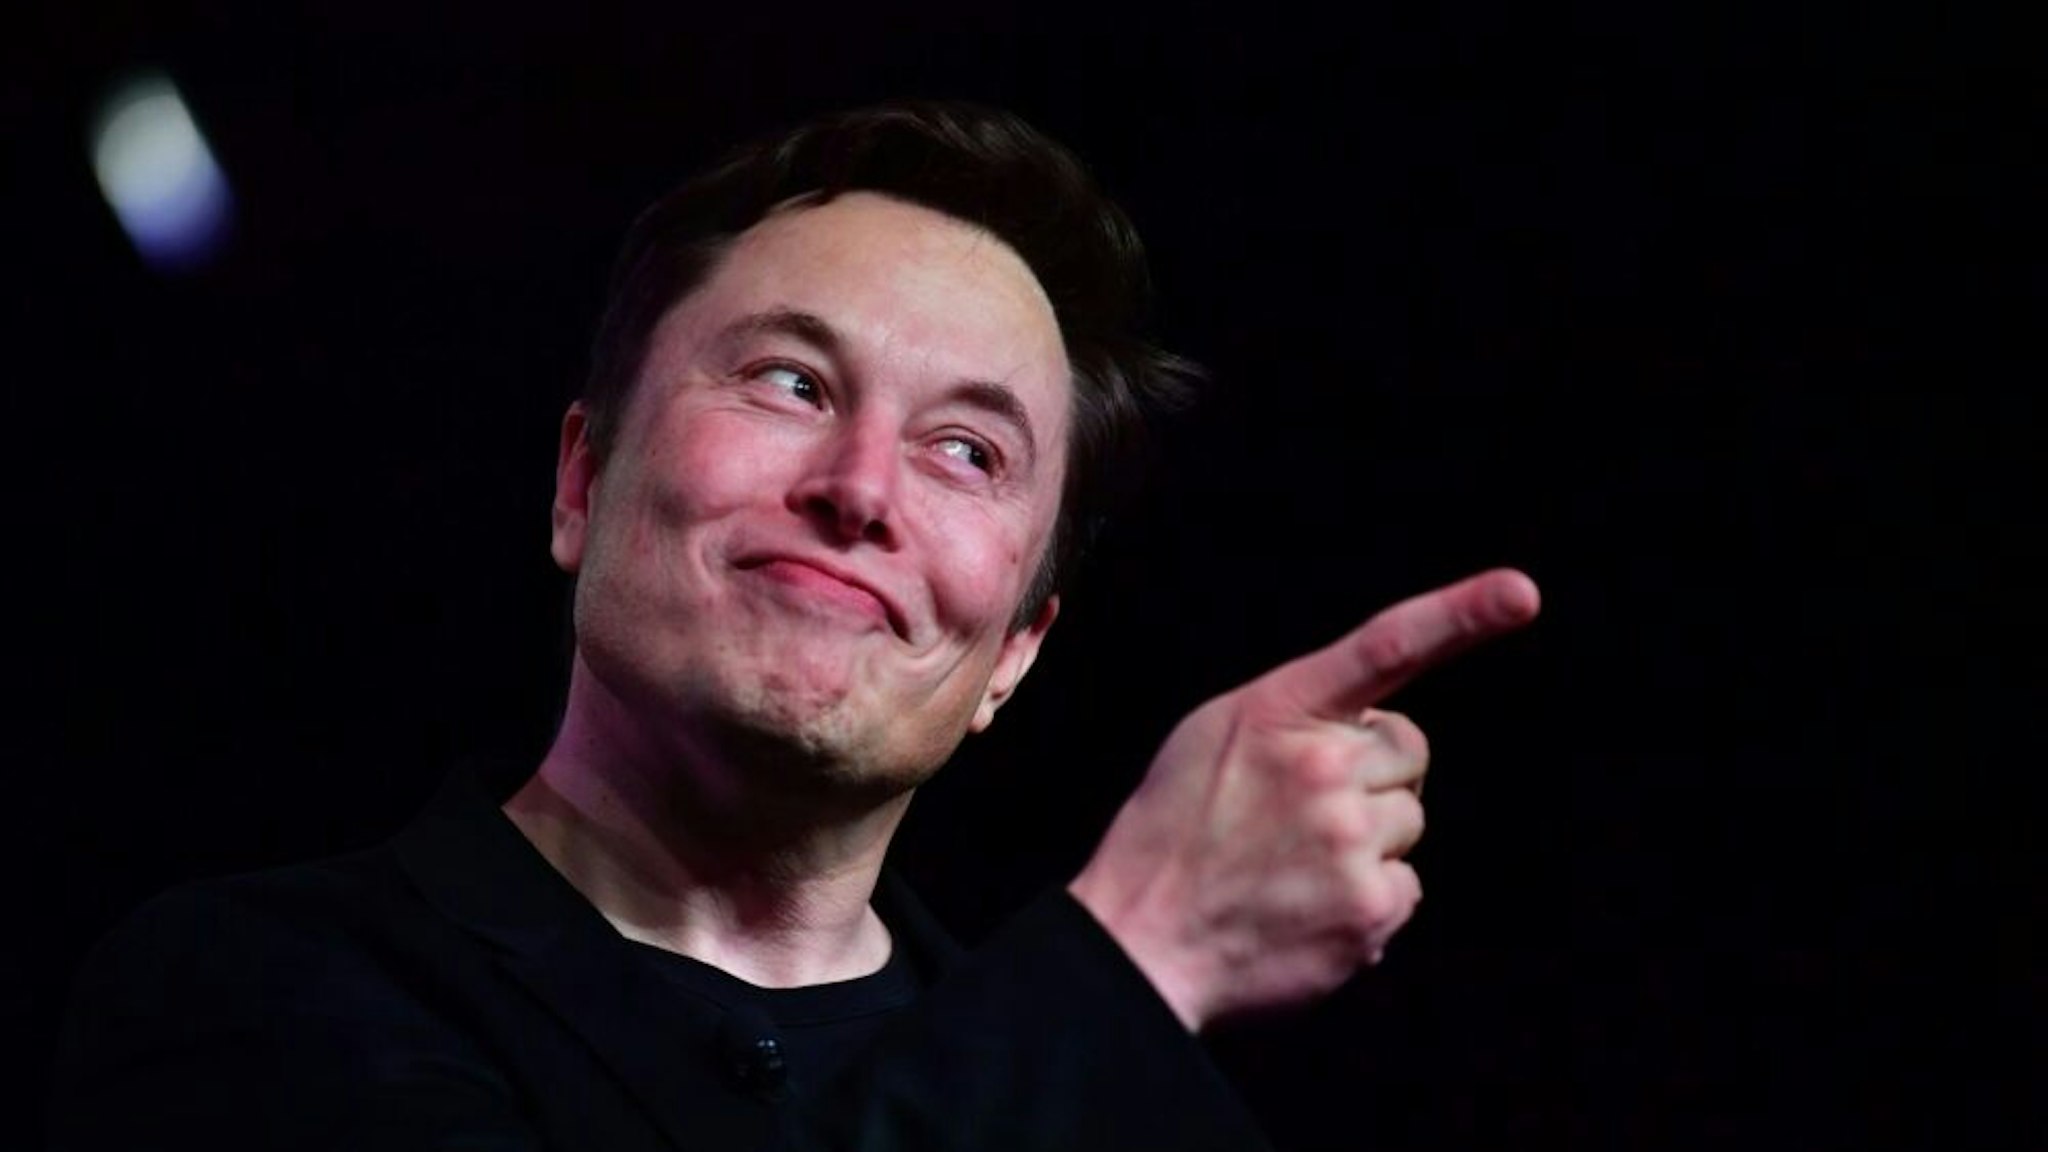 Tesla CEO Elon Musk speaks during the unveiling of the new Tesla Model Y in Hawthorne, California on March 14, 2019.